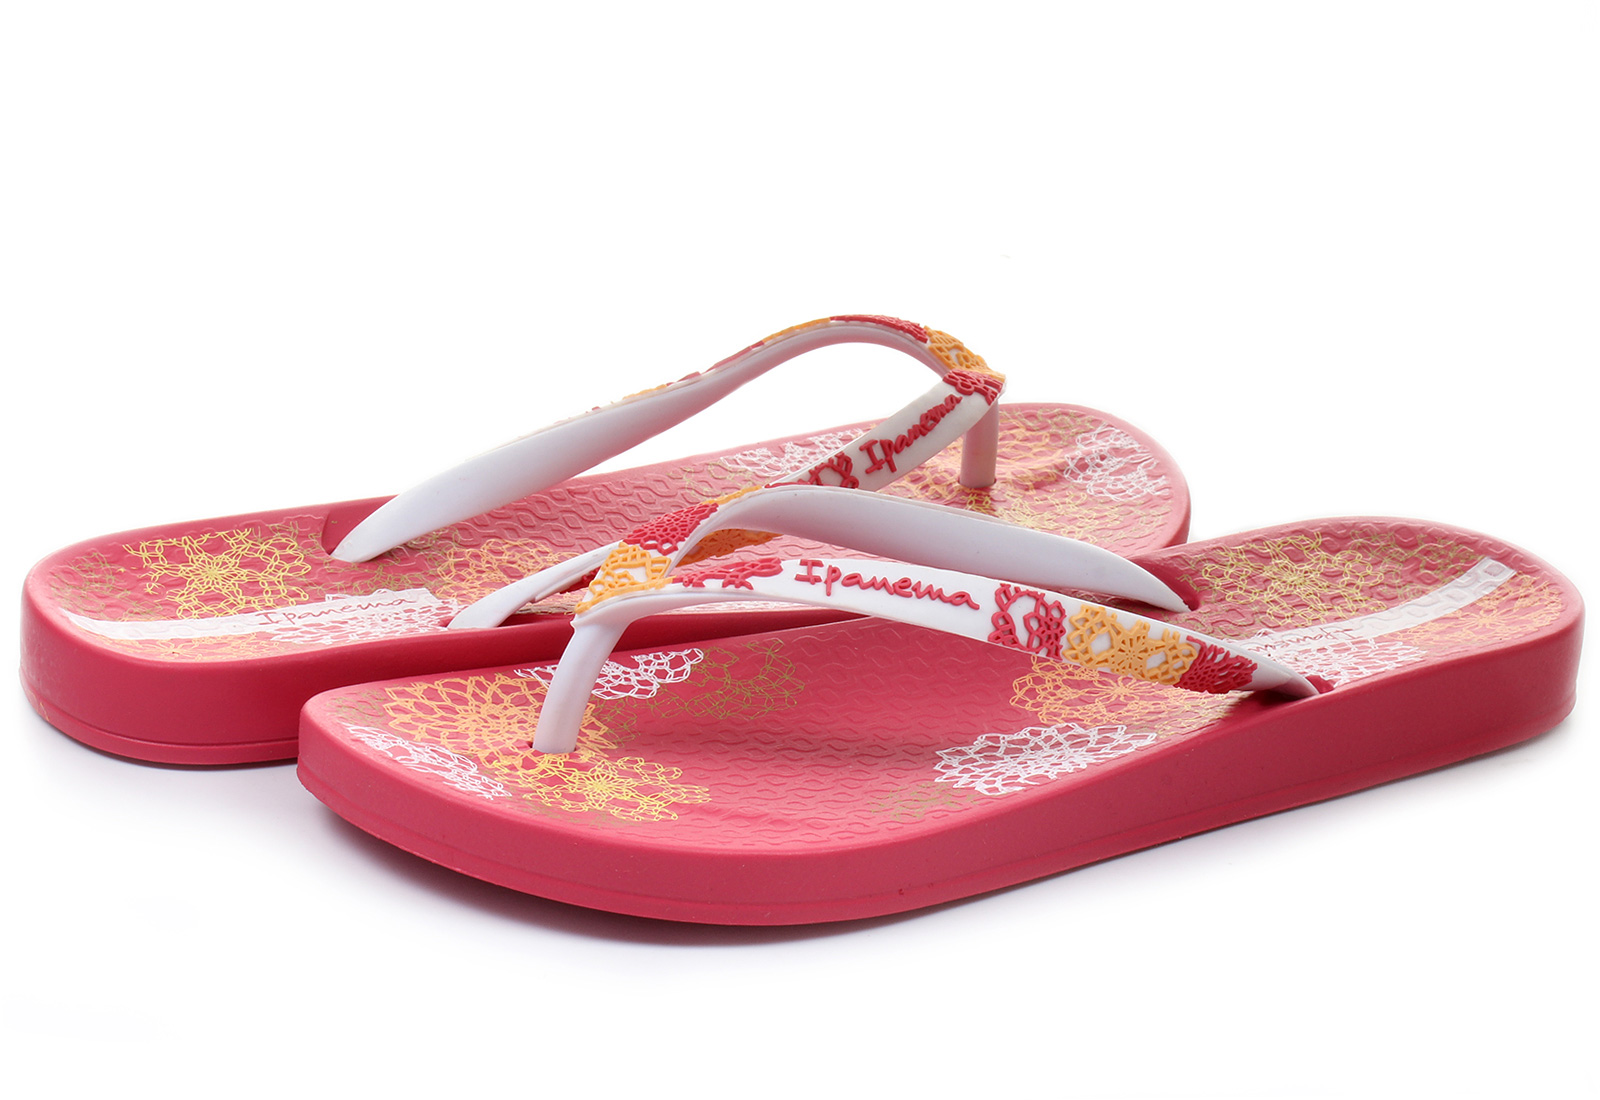 the Slippers   Shoes    slippers Anatomic for Ipanema   Iv   81156 Lovely office 20700 Office